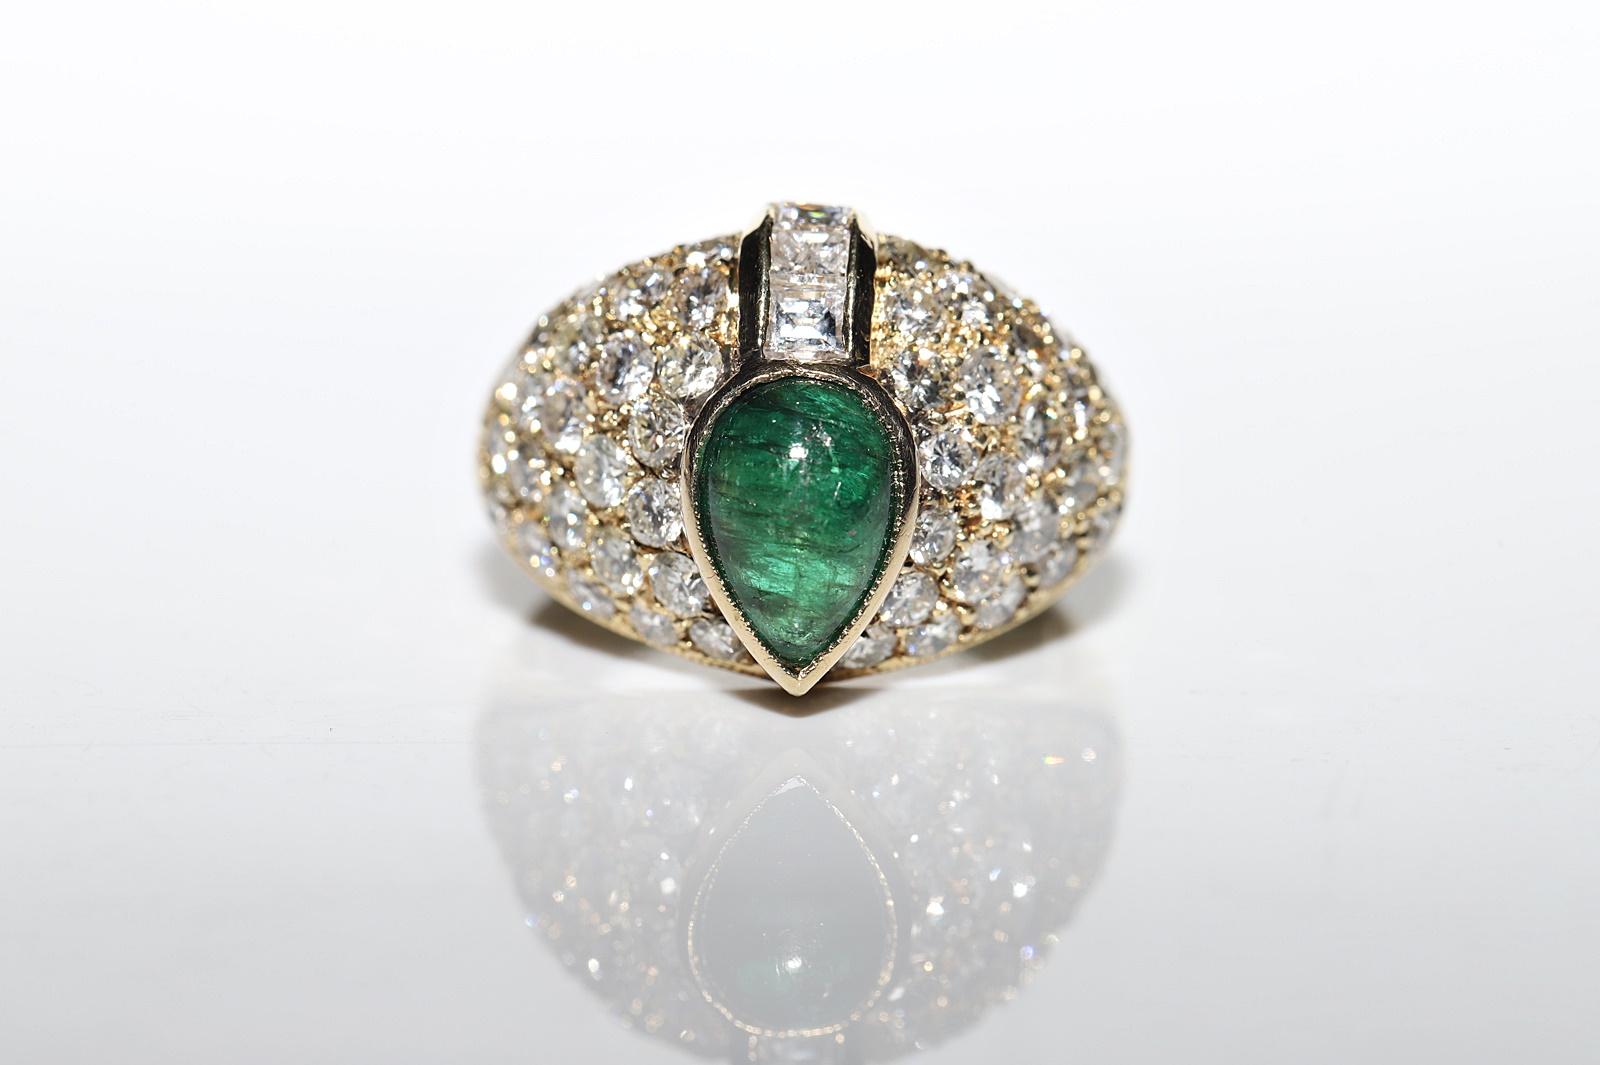 In very good condition.
Total weight is 6.7 grams.
Totally is diamond 2 ct.
The diamond is has F-G color and vvs-vs clarity.
Totally emerald 1.40 ct.
Ring size is US 5.5 
We can make any size.
There are small scratches and small cracks on the